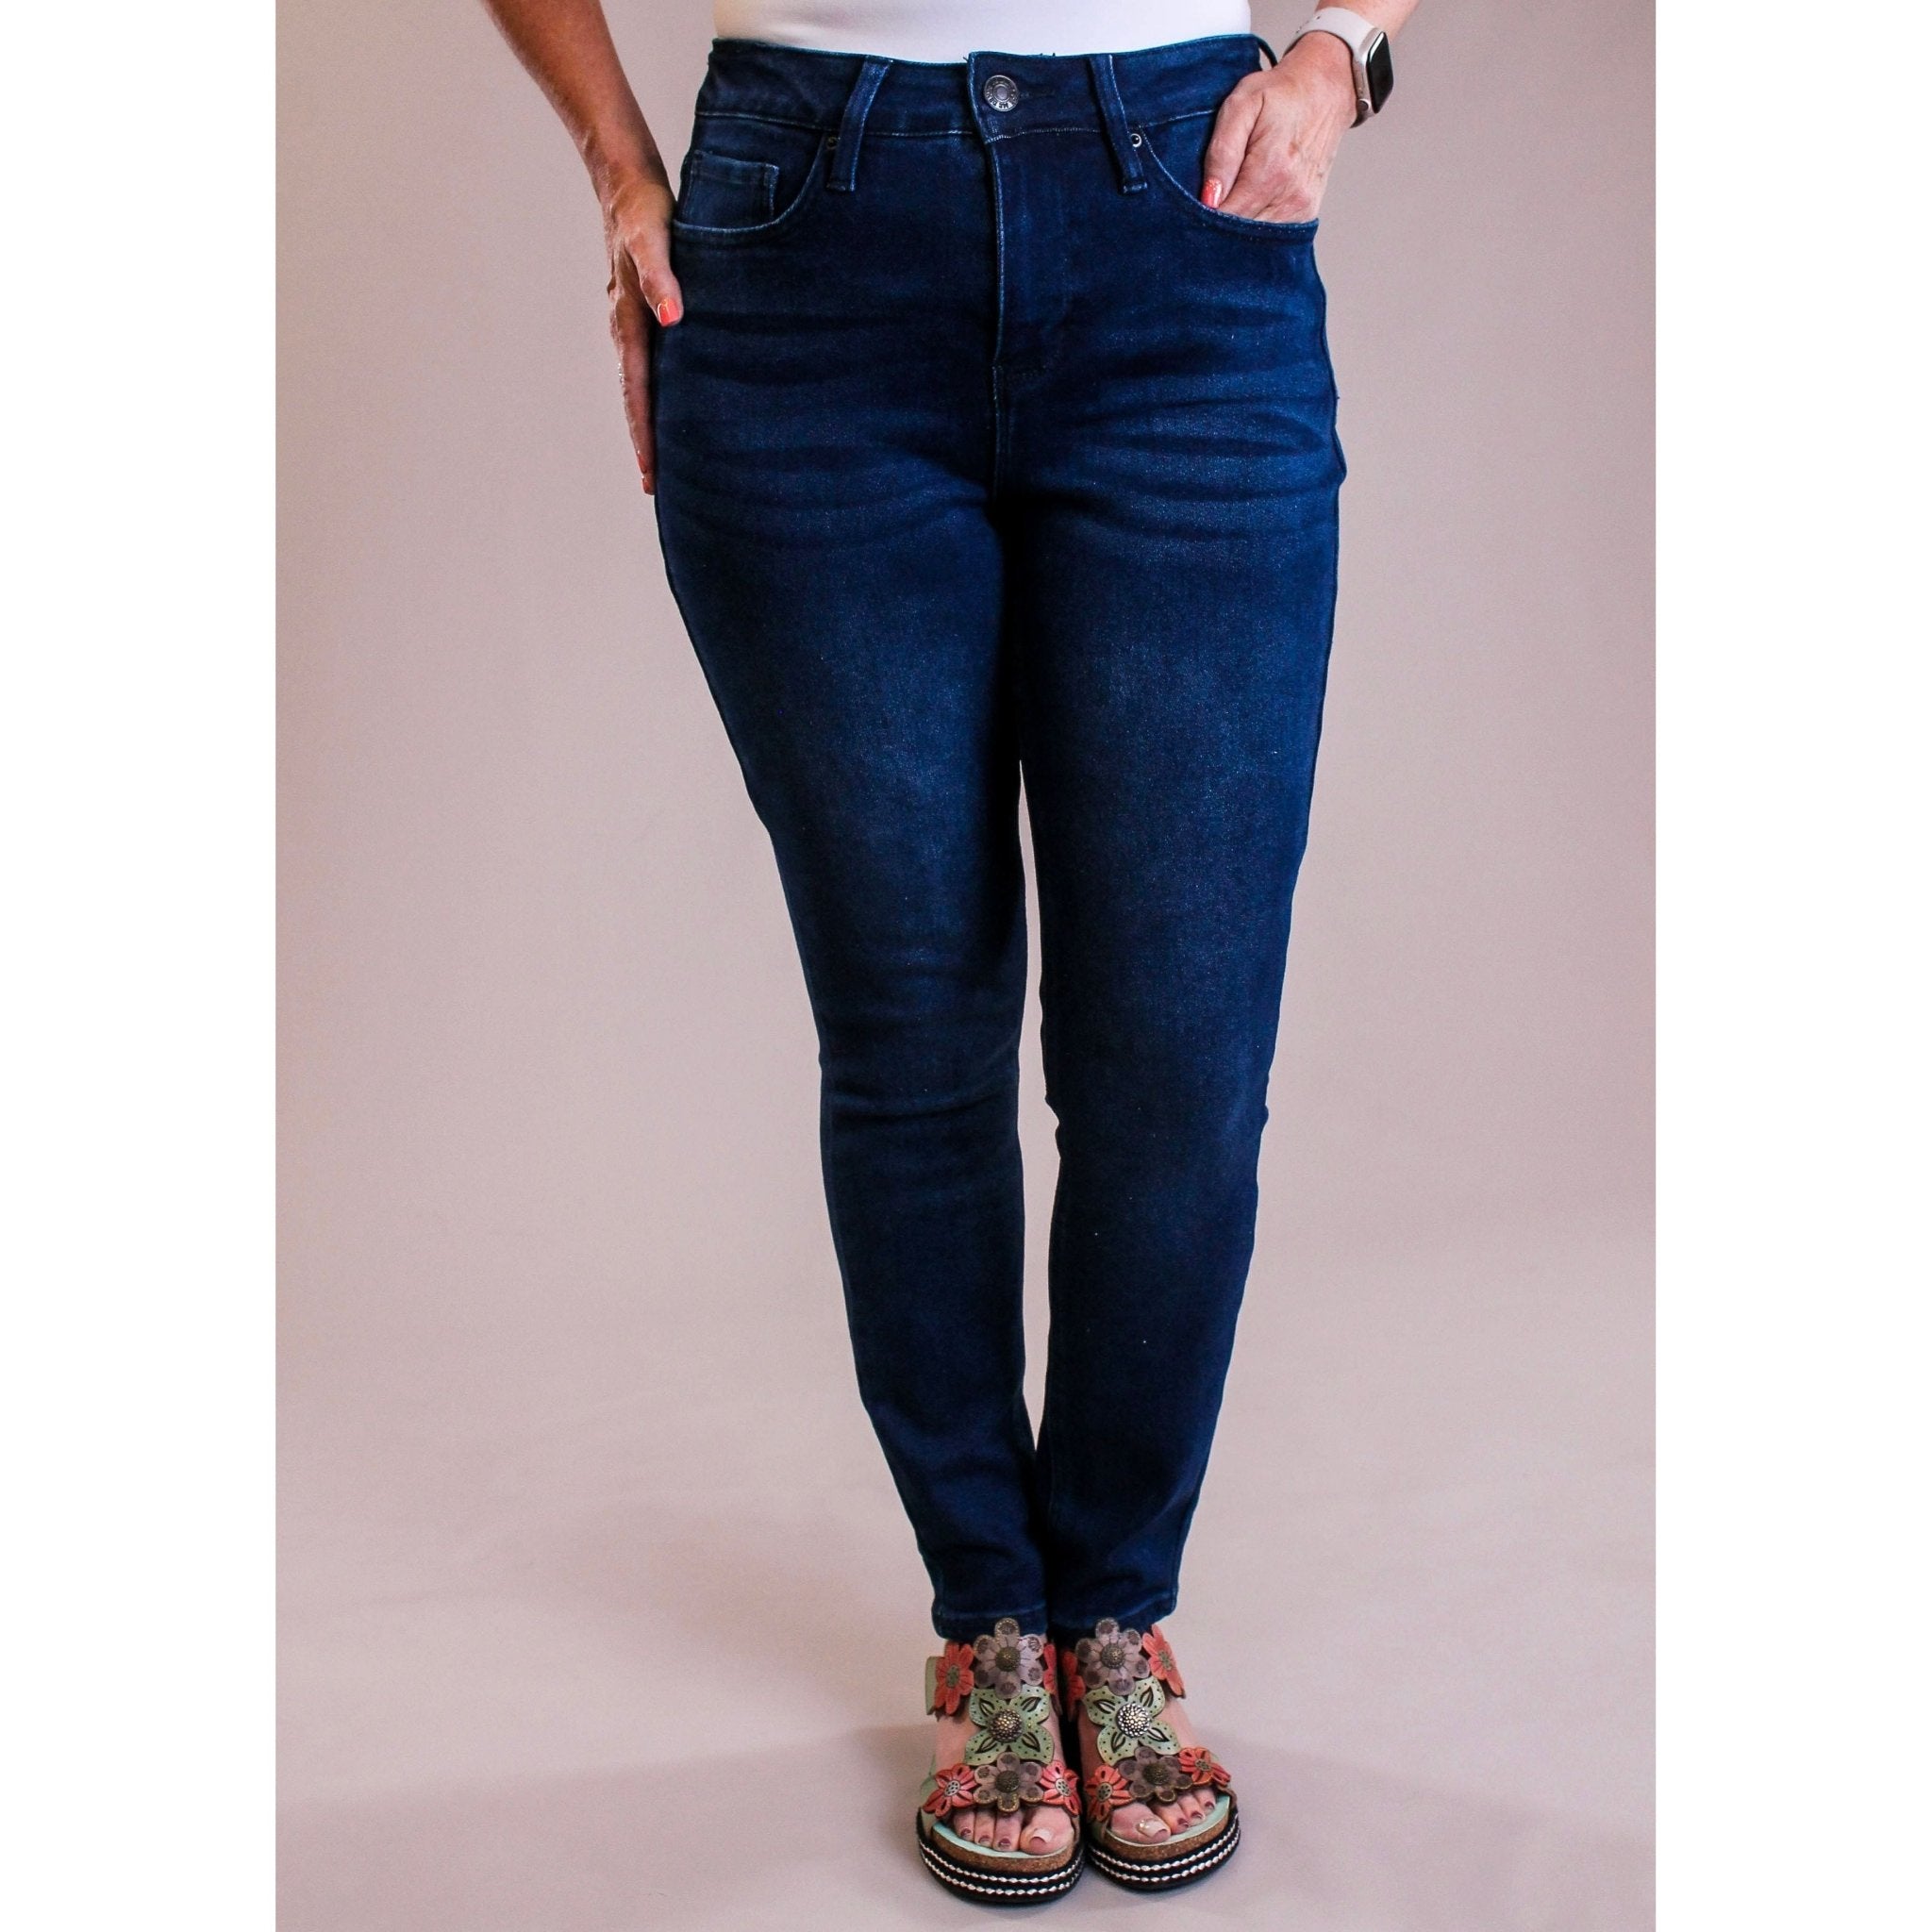 Royalty For Me Vintage Stretch High Rise Skinny Jean